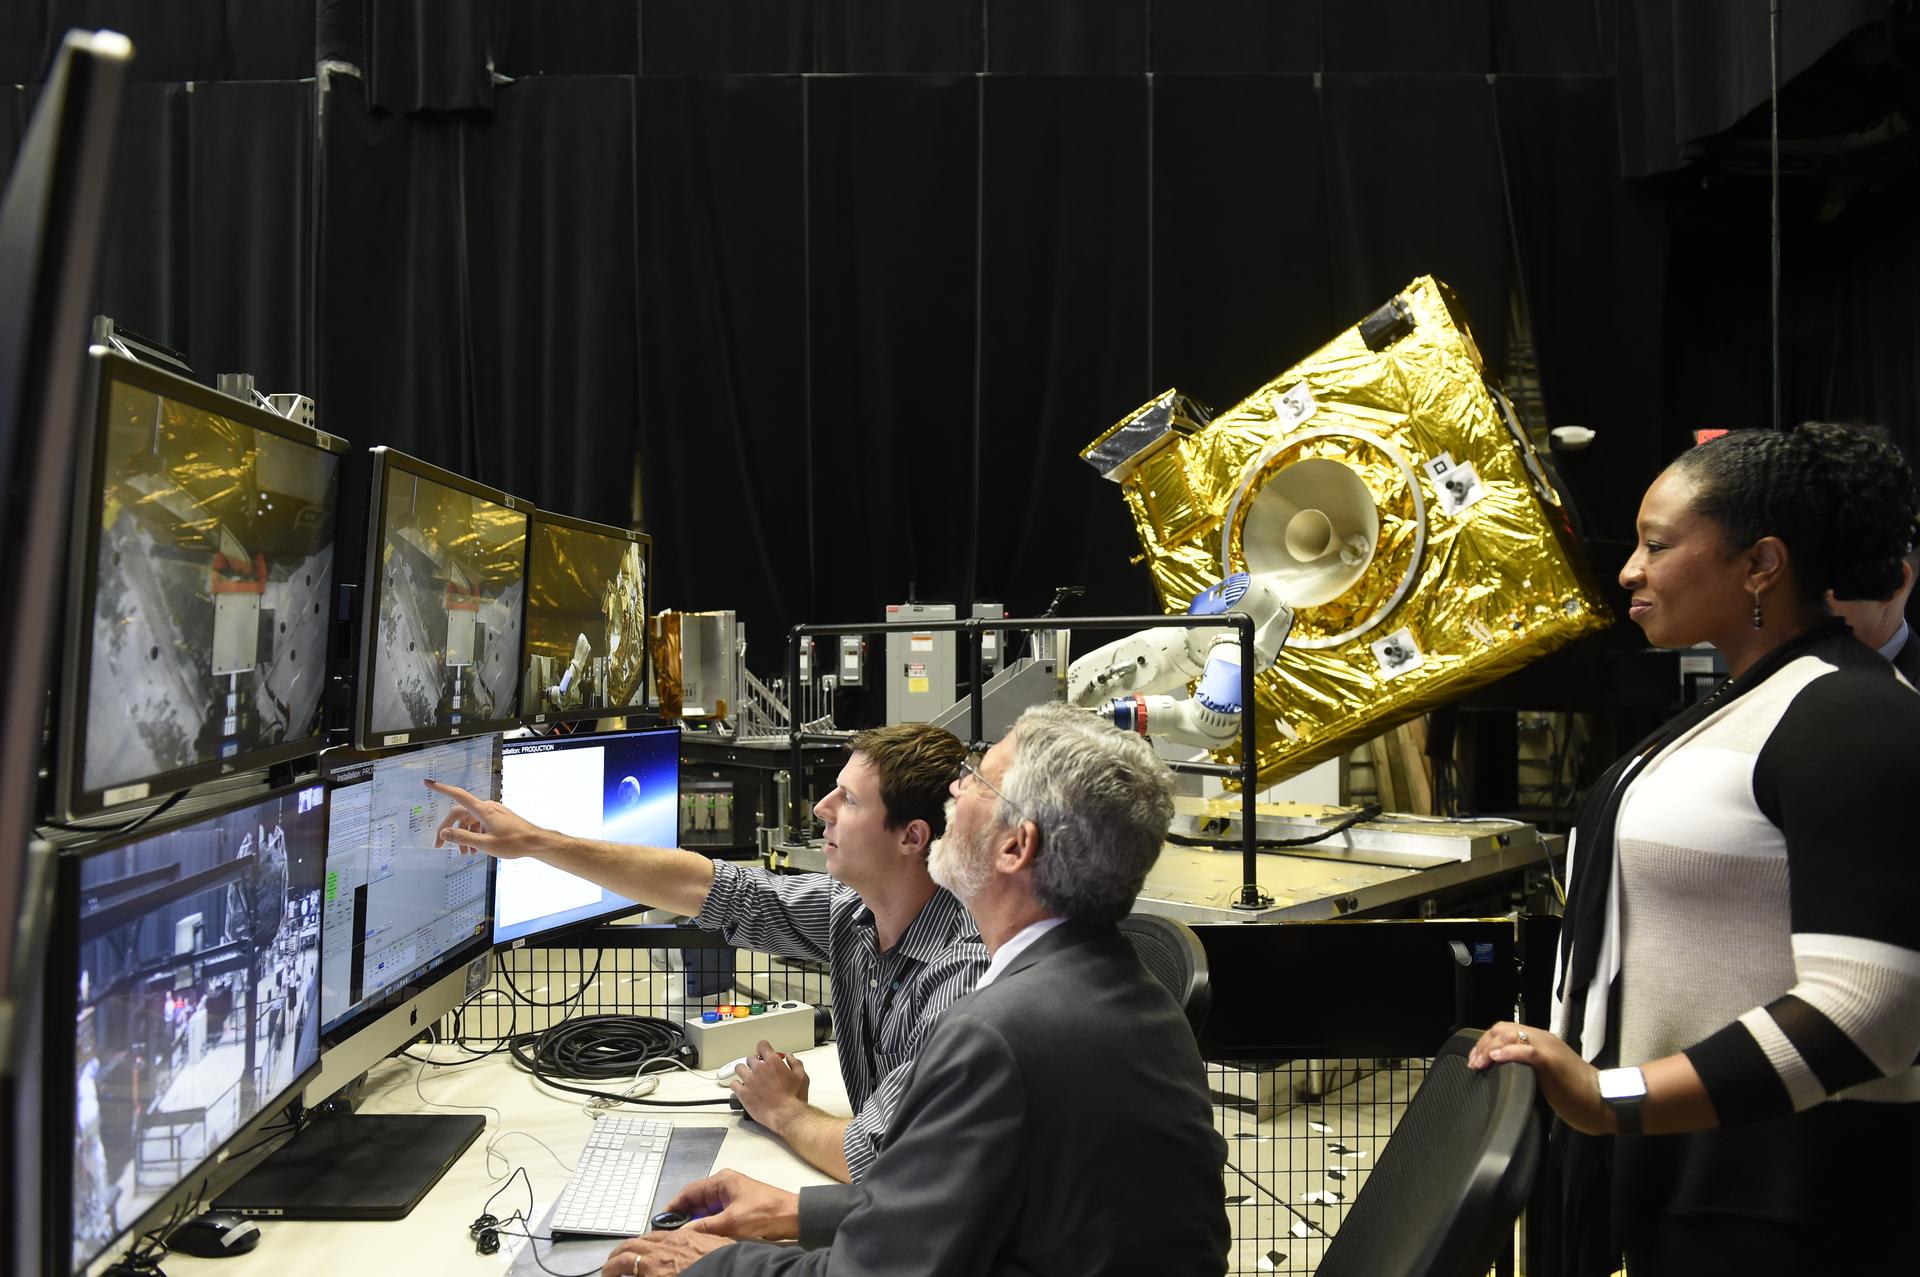 Dr. Holdren (center) operates a robotic arm within the Robotic Operations Center as roboticist describes the ROC’s simulation capabilities, and Deputy Center Director for Technology and Research Investments at Goddard observes the demonstration.